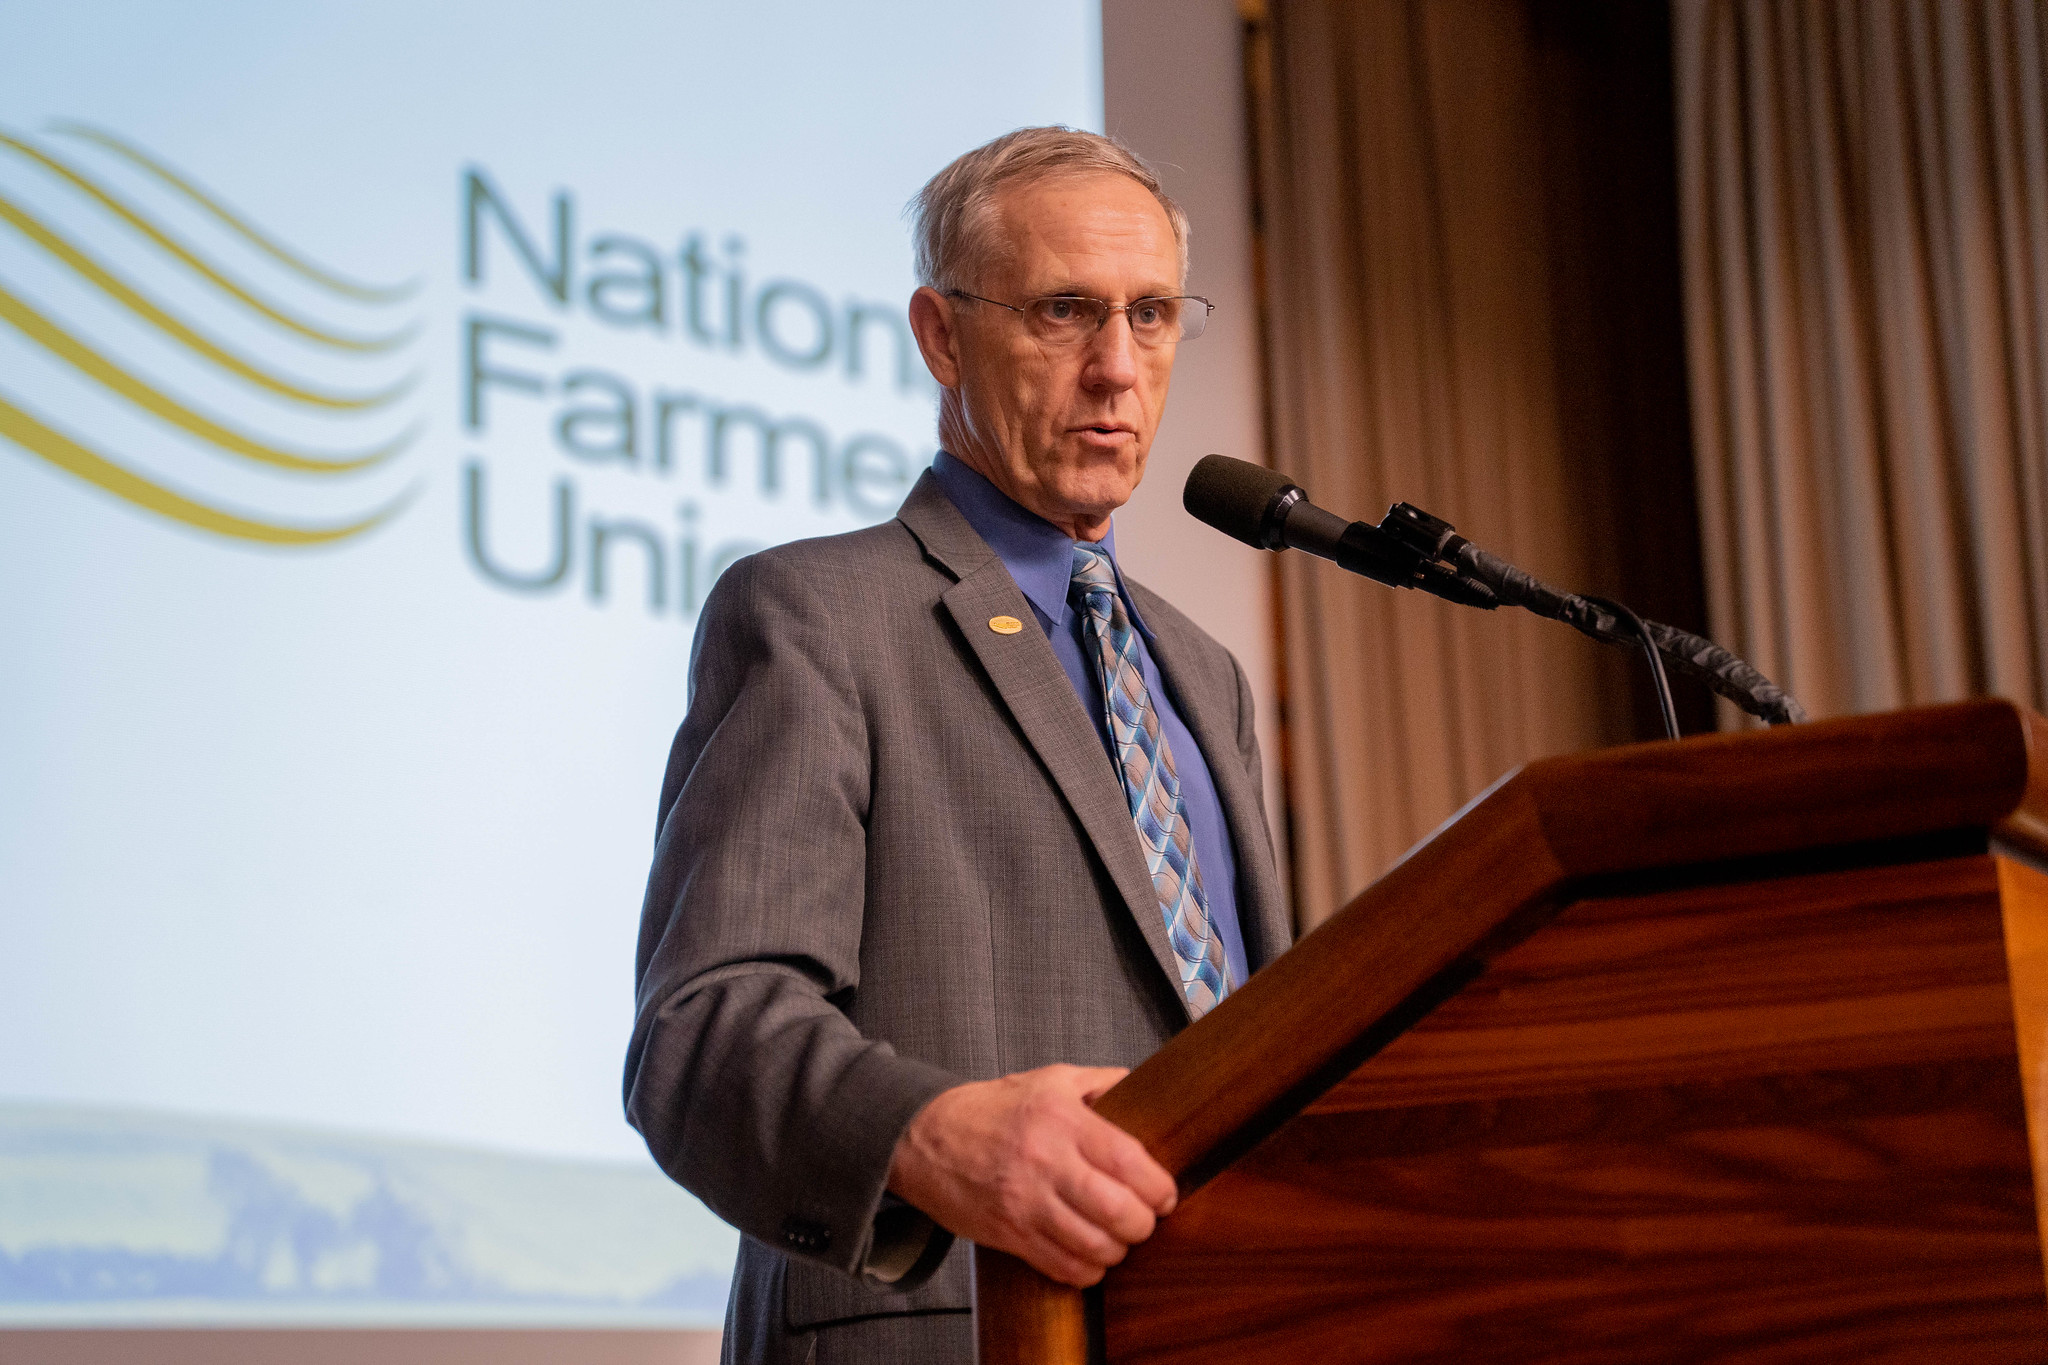 Johnson to Retire from Role as Farmers Union President